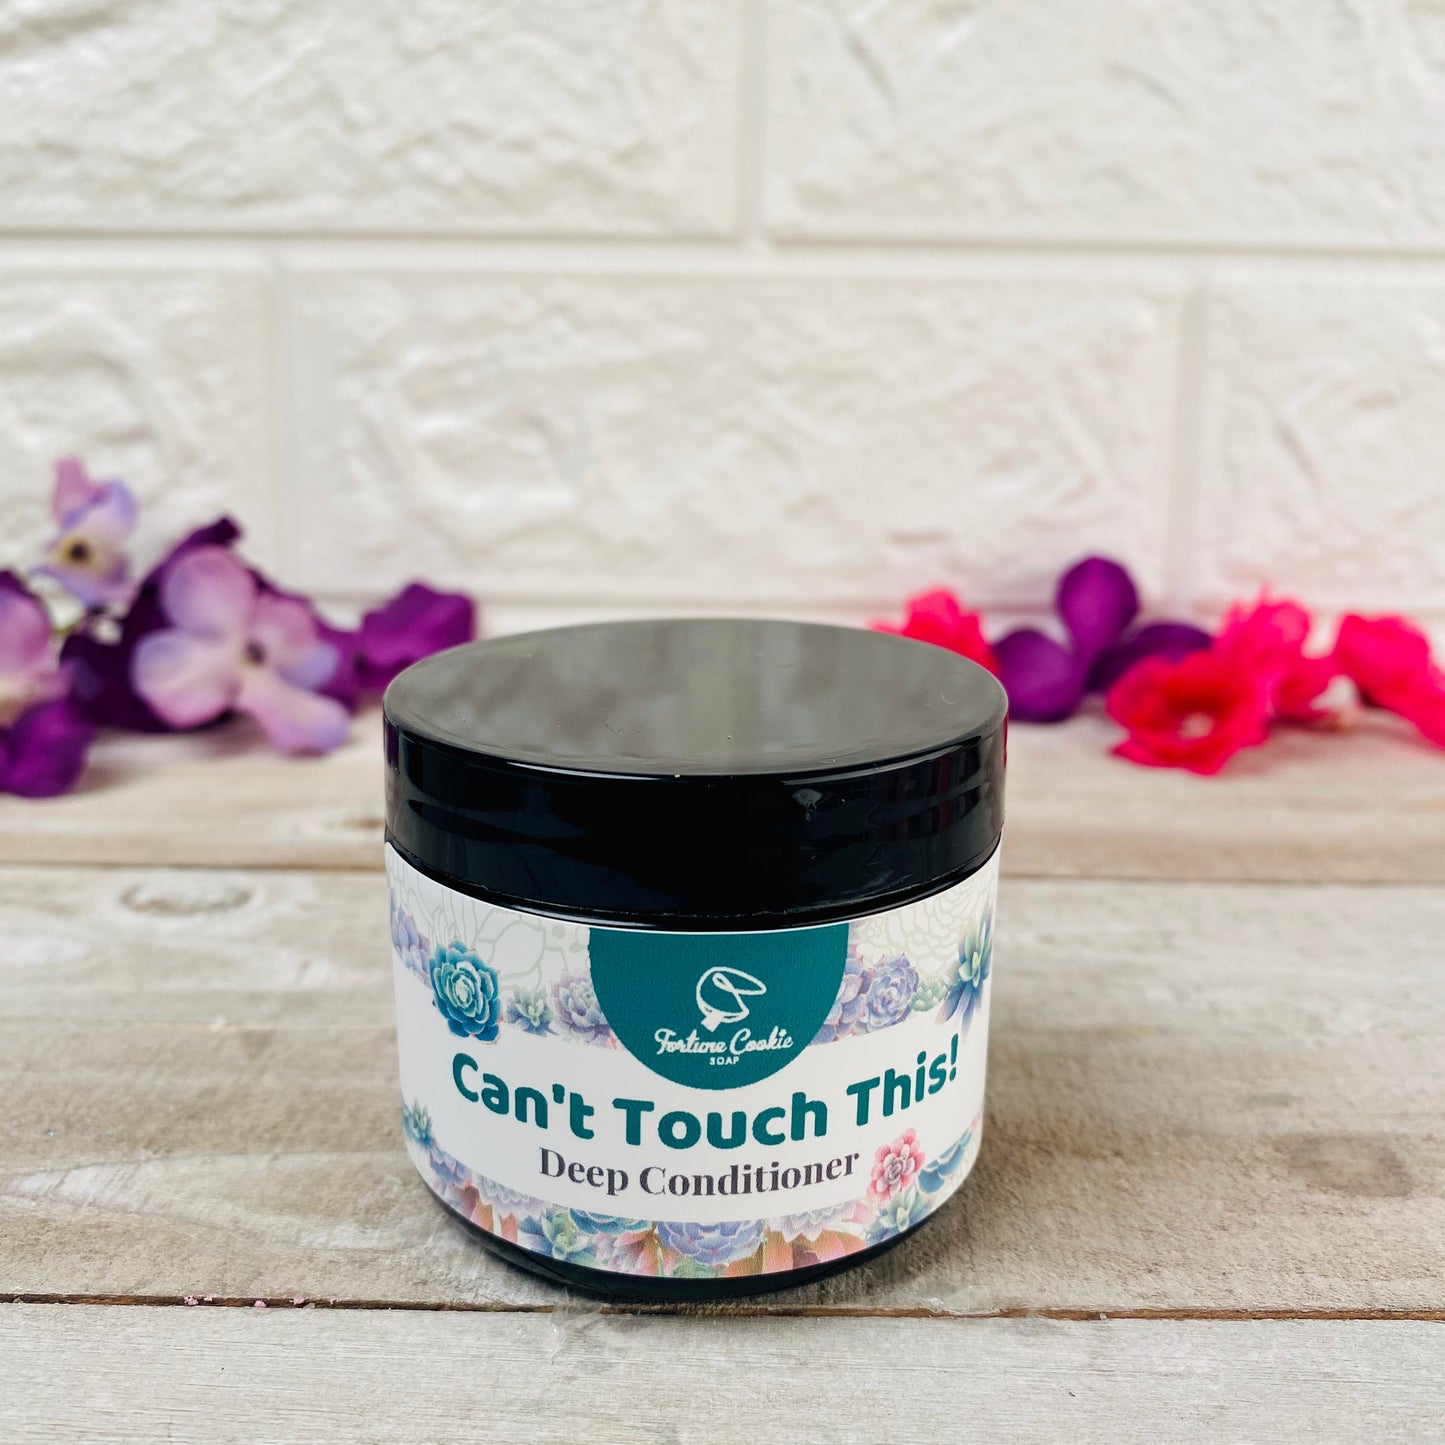 CAN'T TOUCH THIS! Deep Conditioner